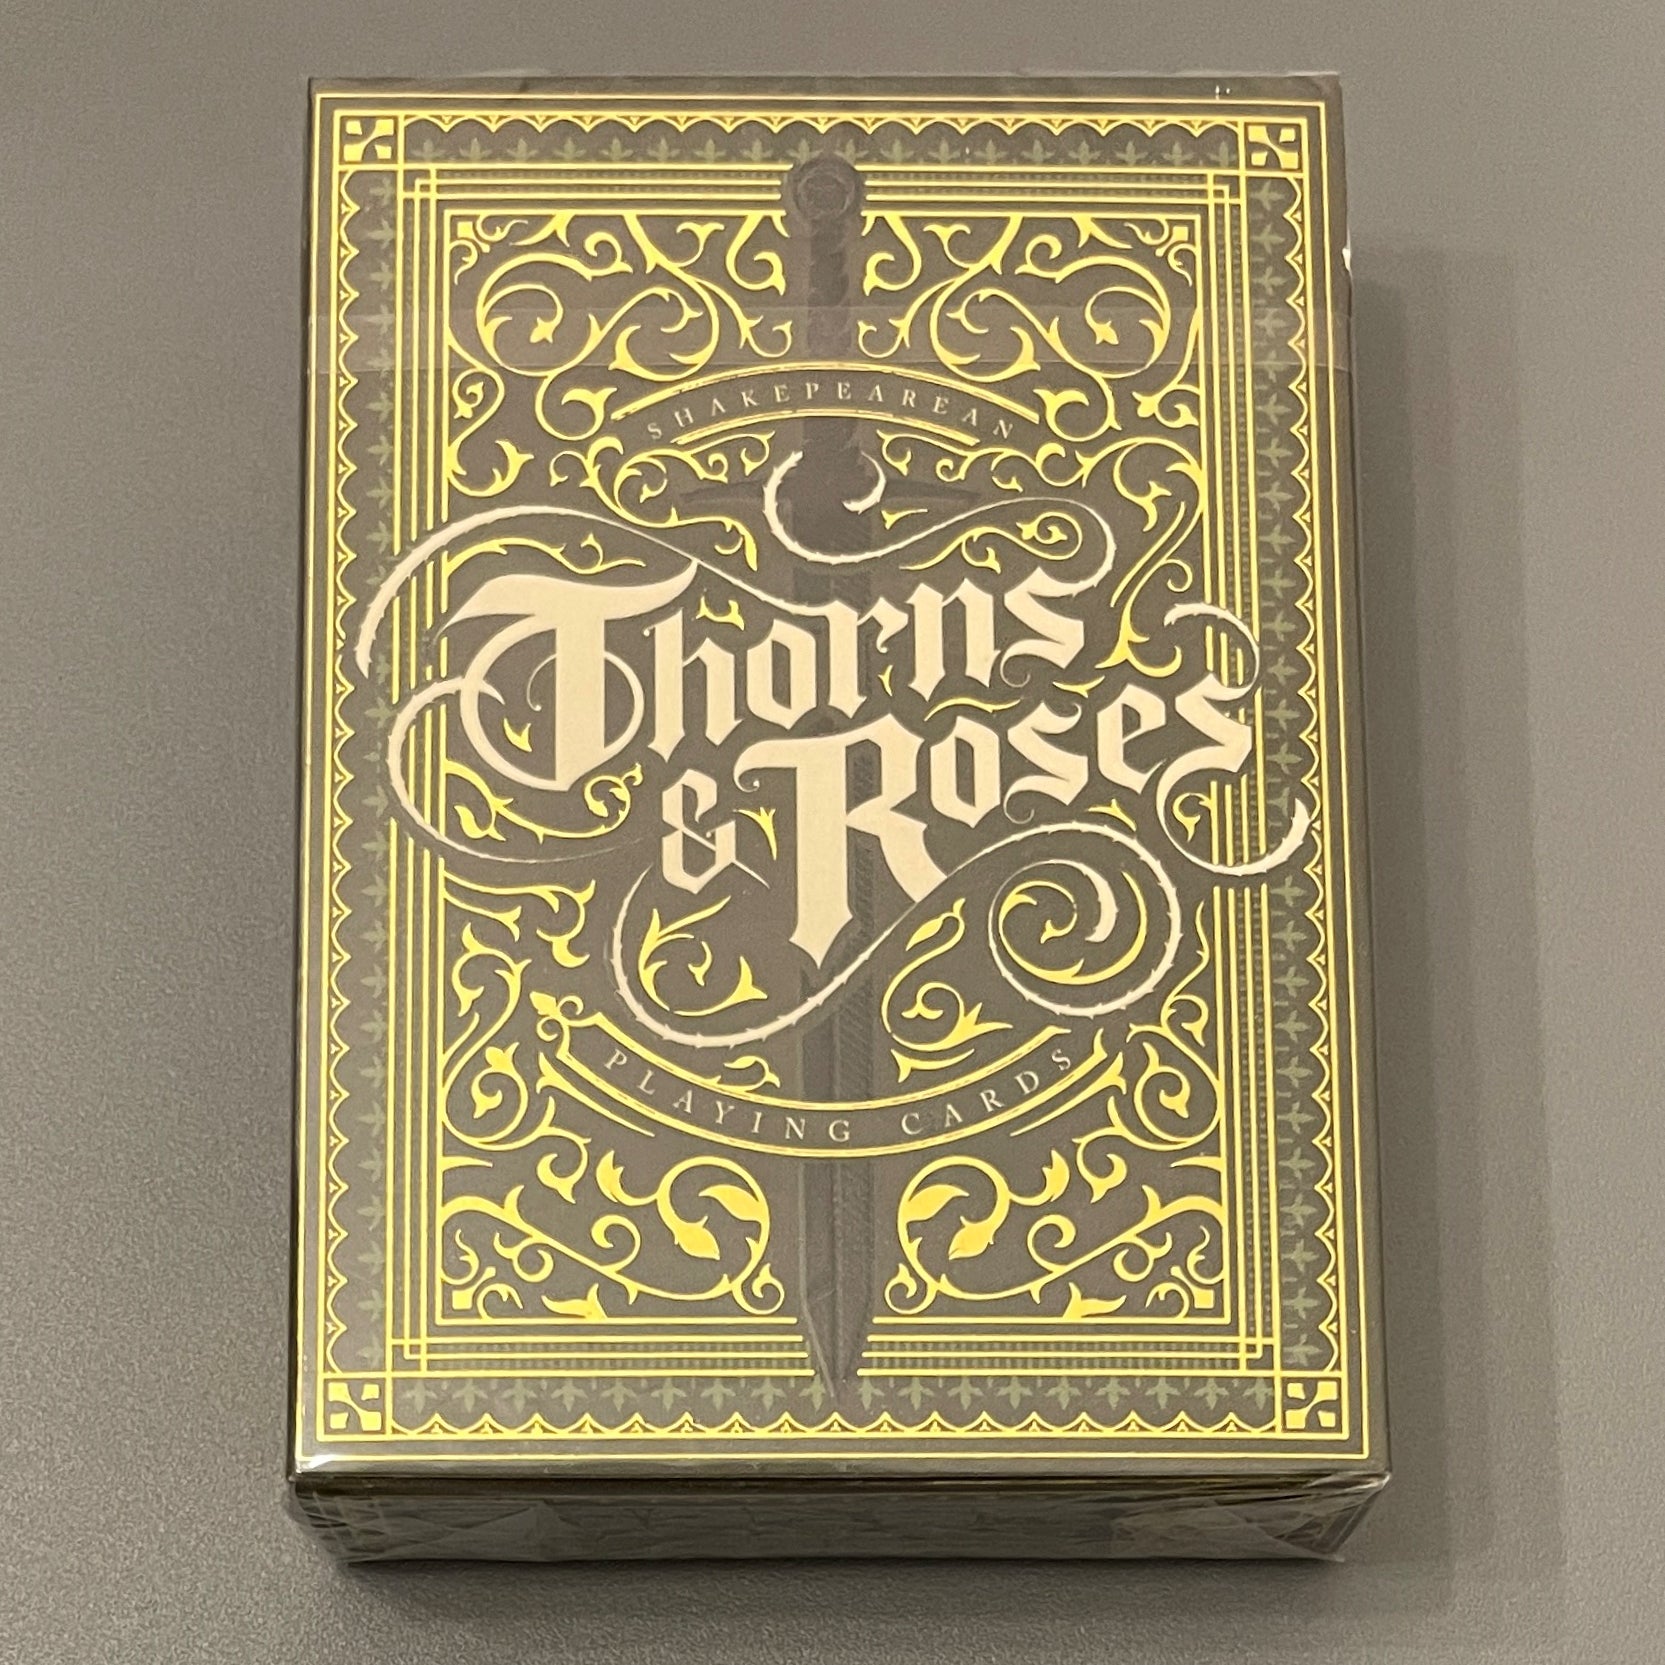 Thorns & Roses (Thorns Edition) [AUCTION]